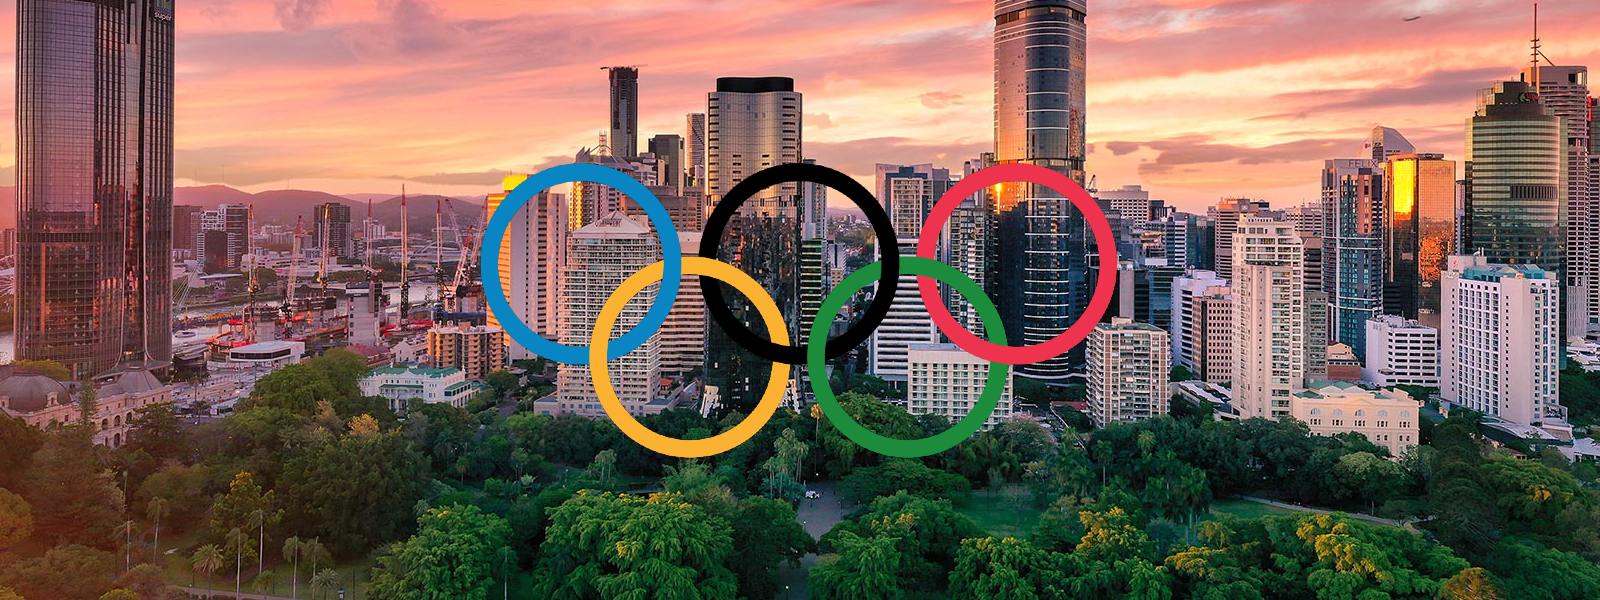 Australia to host Olympics again after Brisbane confirmed for 2032 Games